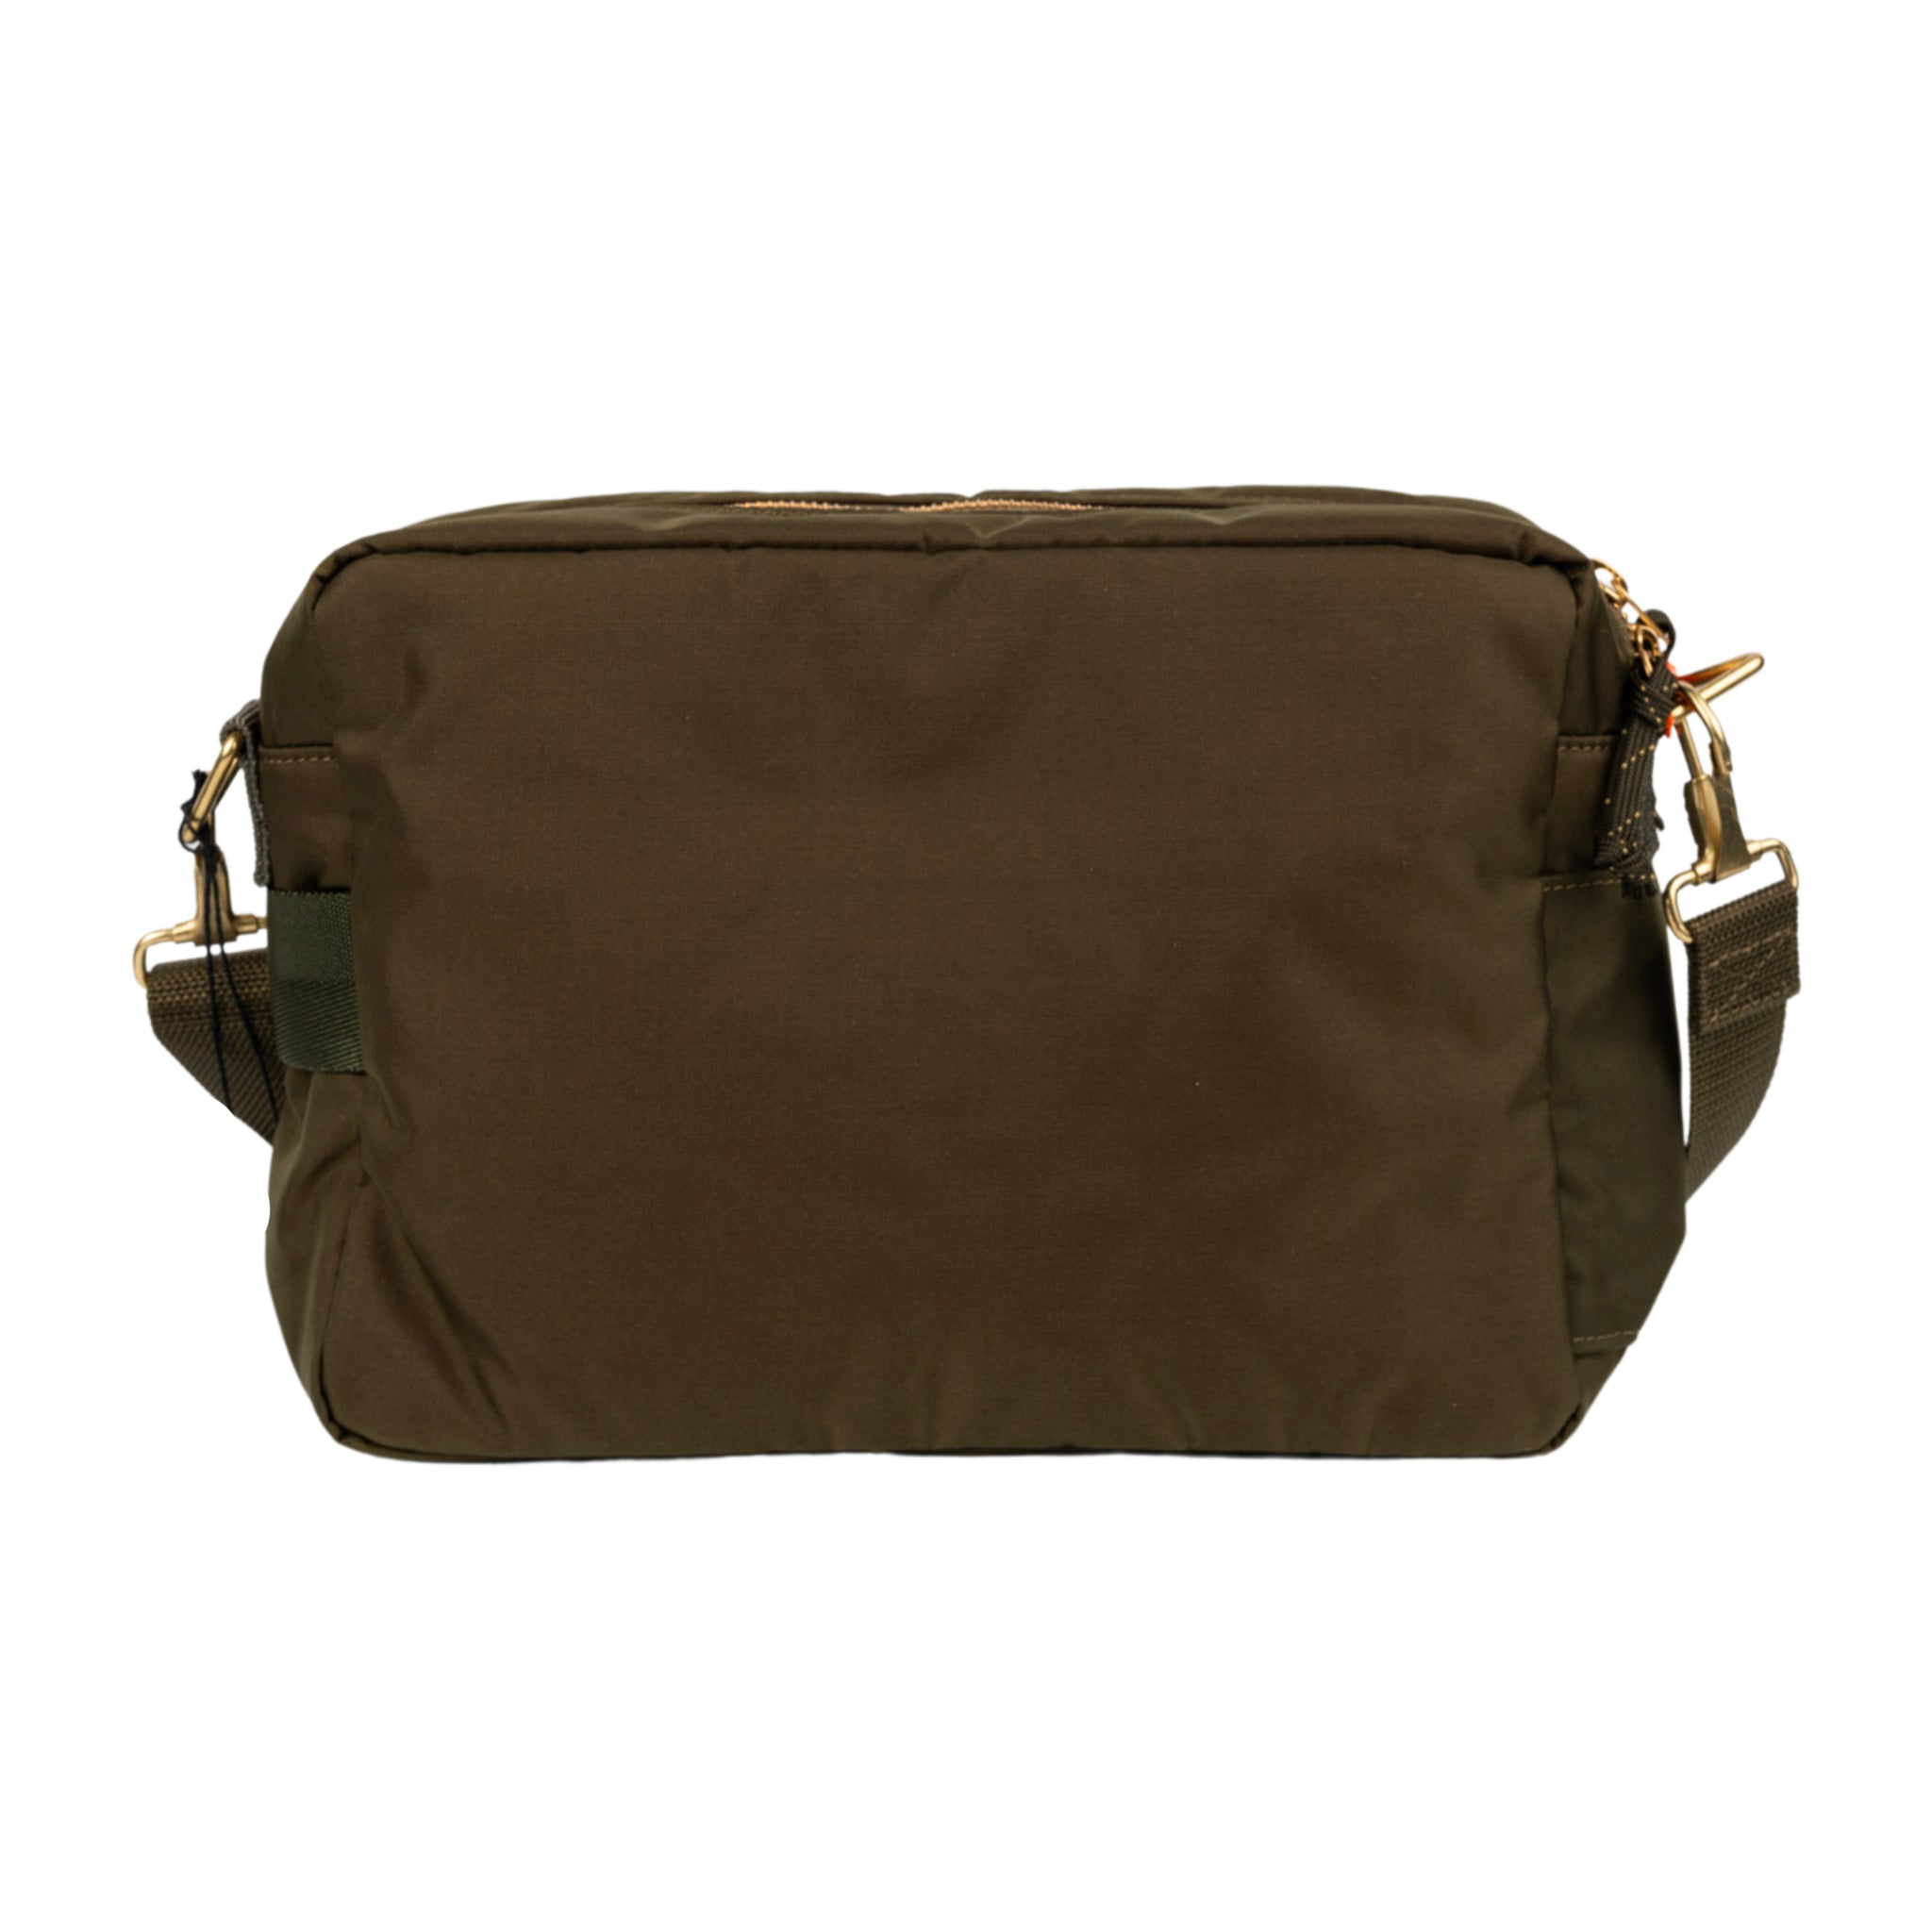 Force borsa a tracolla in nylon in olive